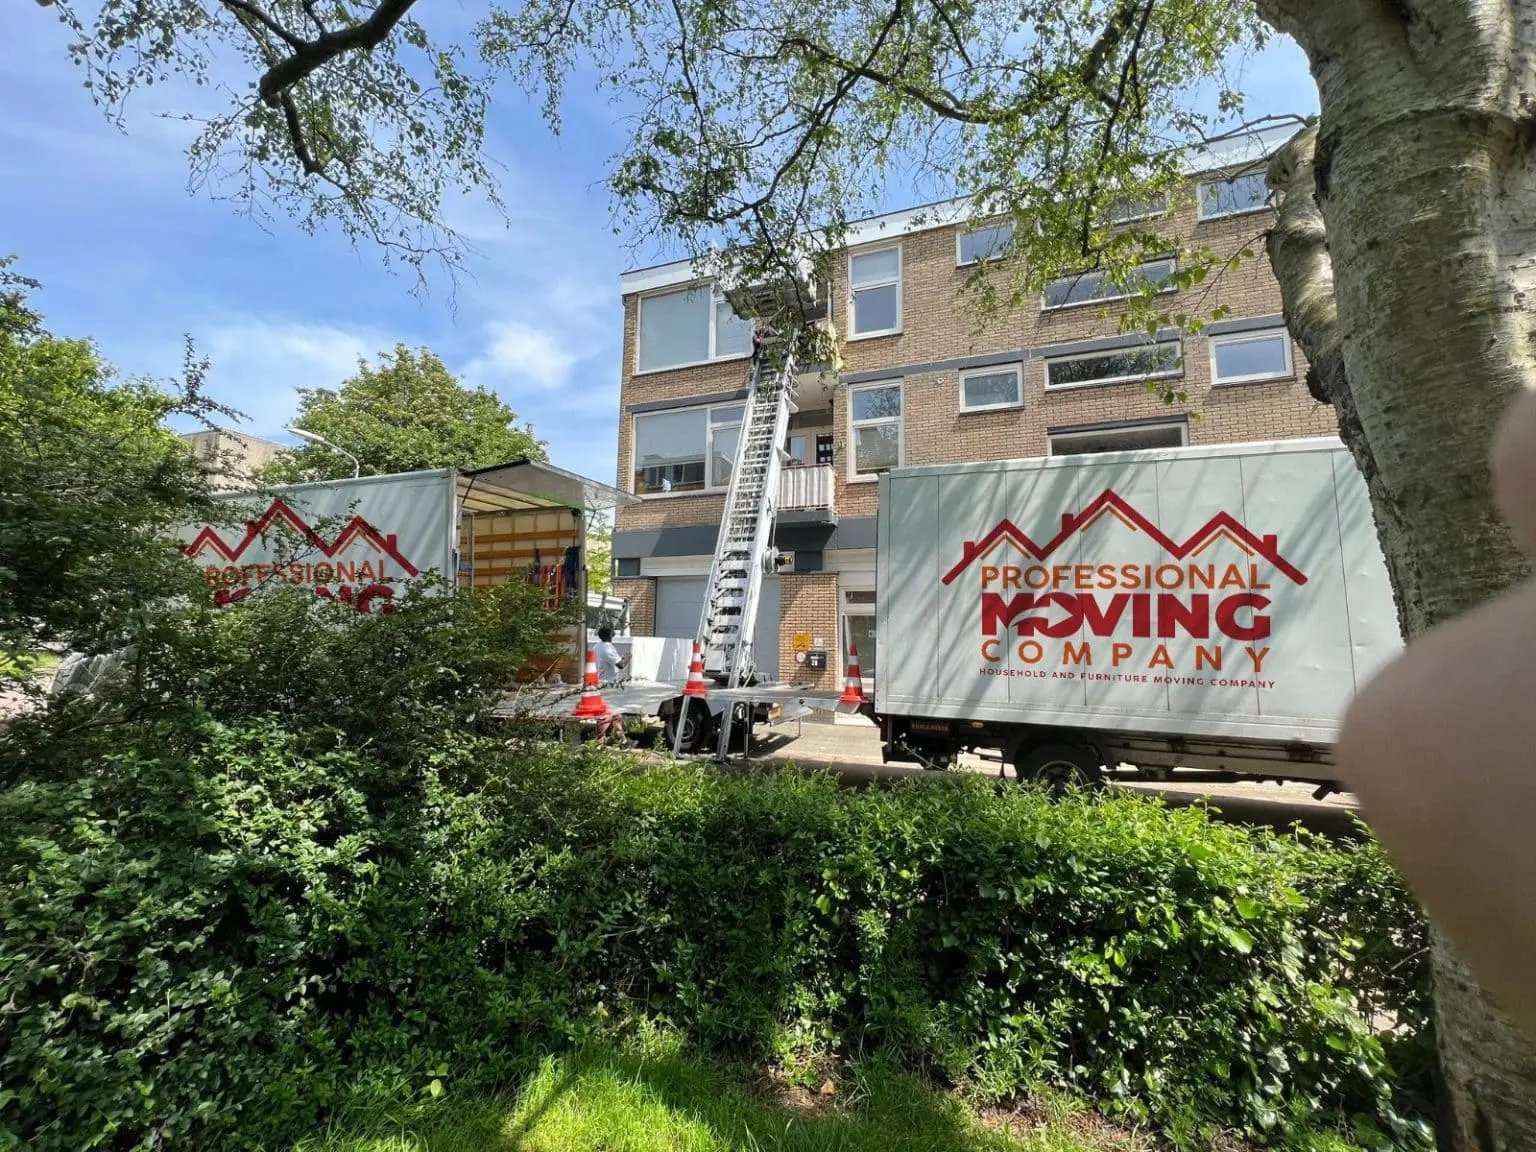 Moving Company Westvoorne | Customized Moving Services in Westvoorne for Your Convenience